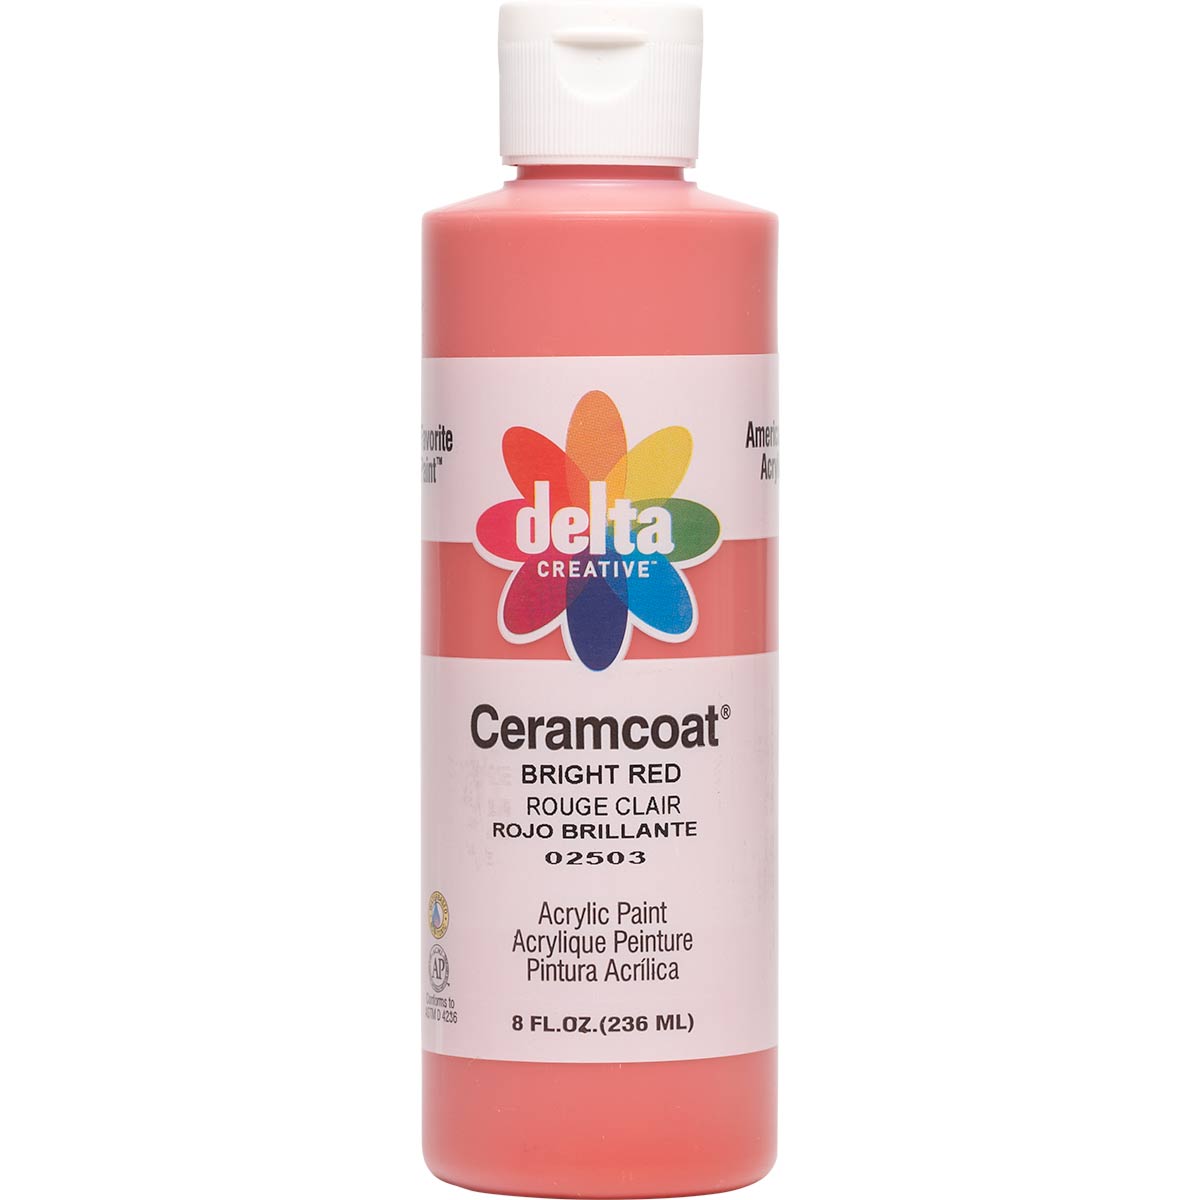 DecoArt Acrylic Paint Primary Red 8 oz - Gaunt Industries